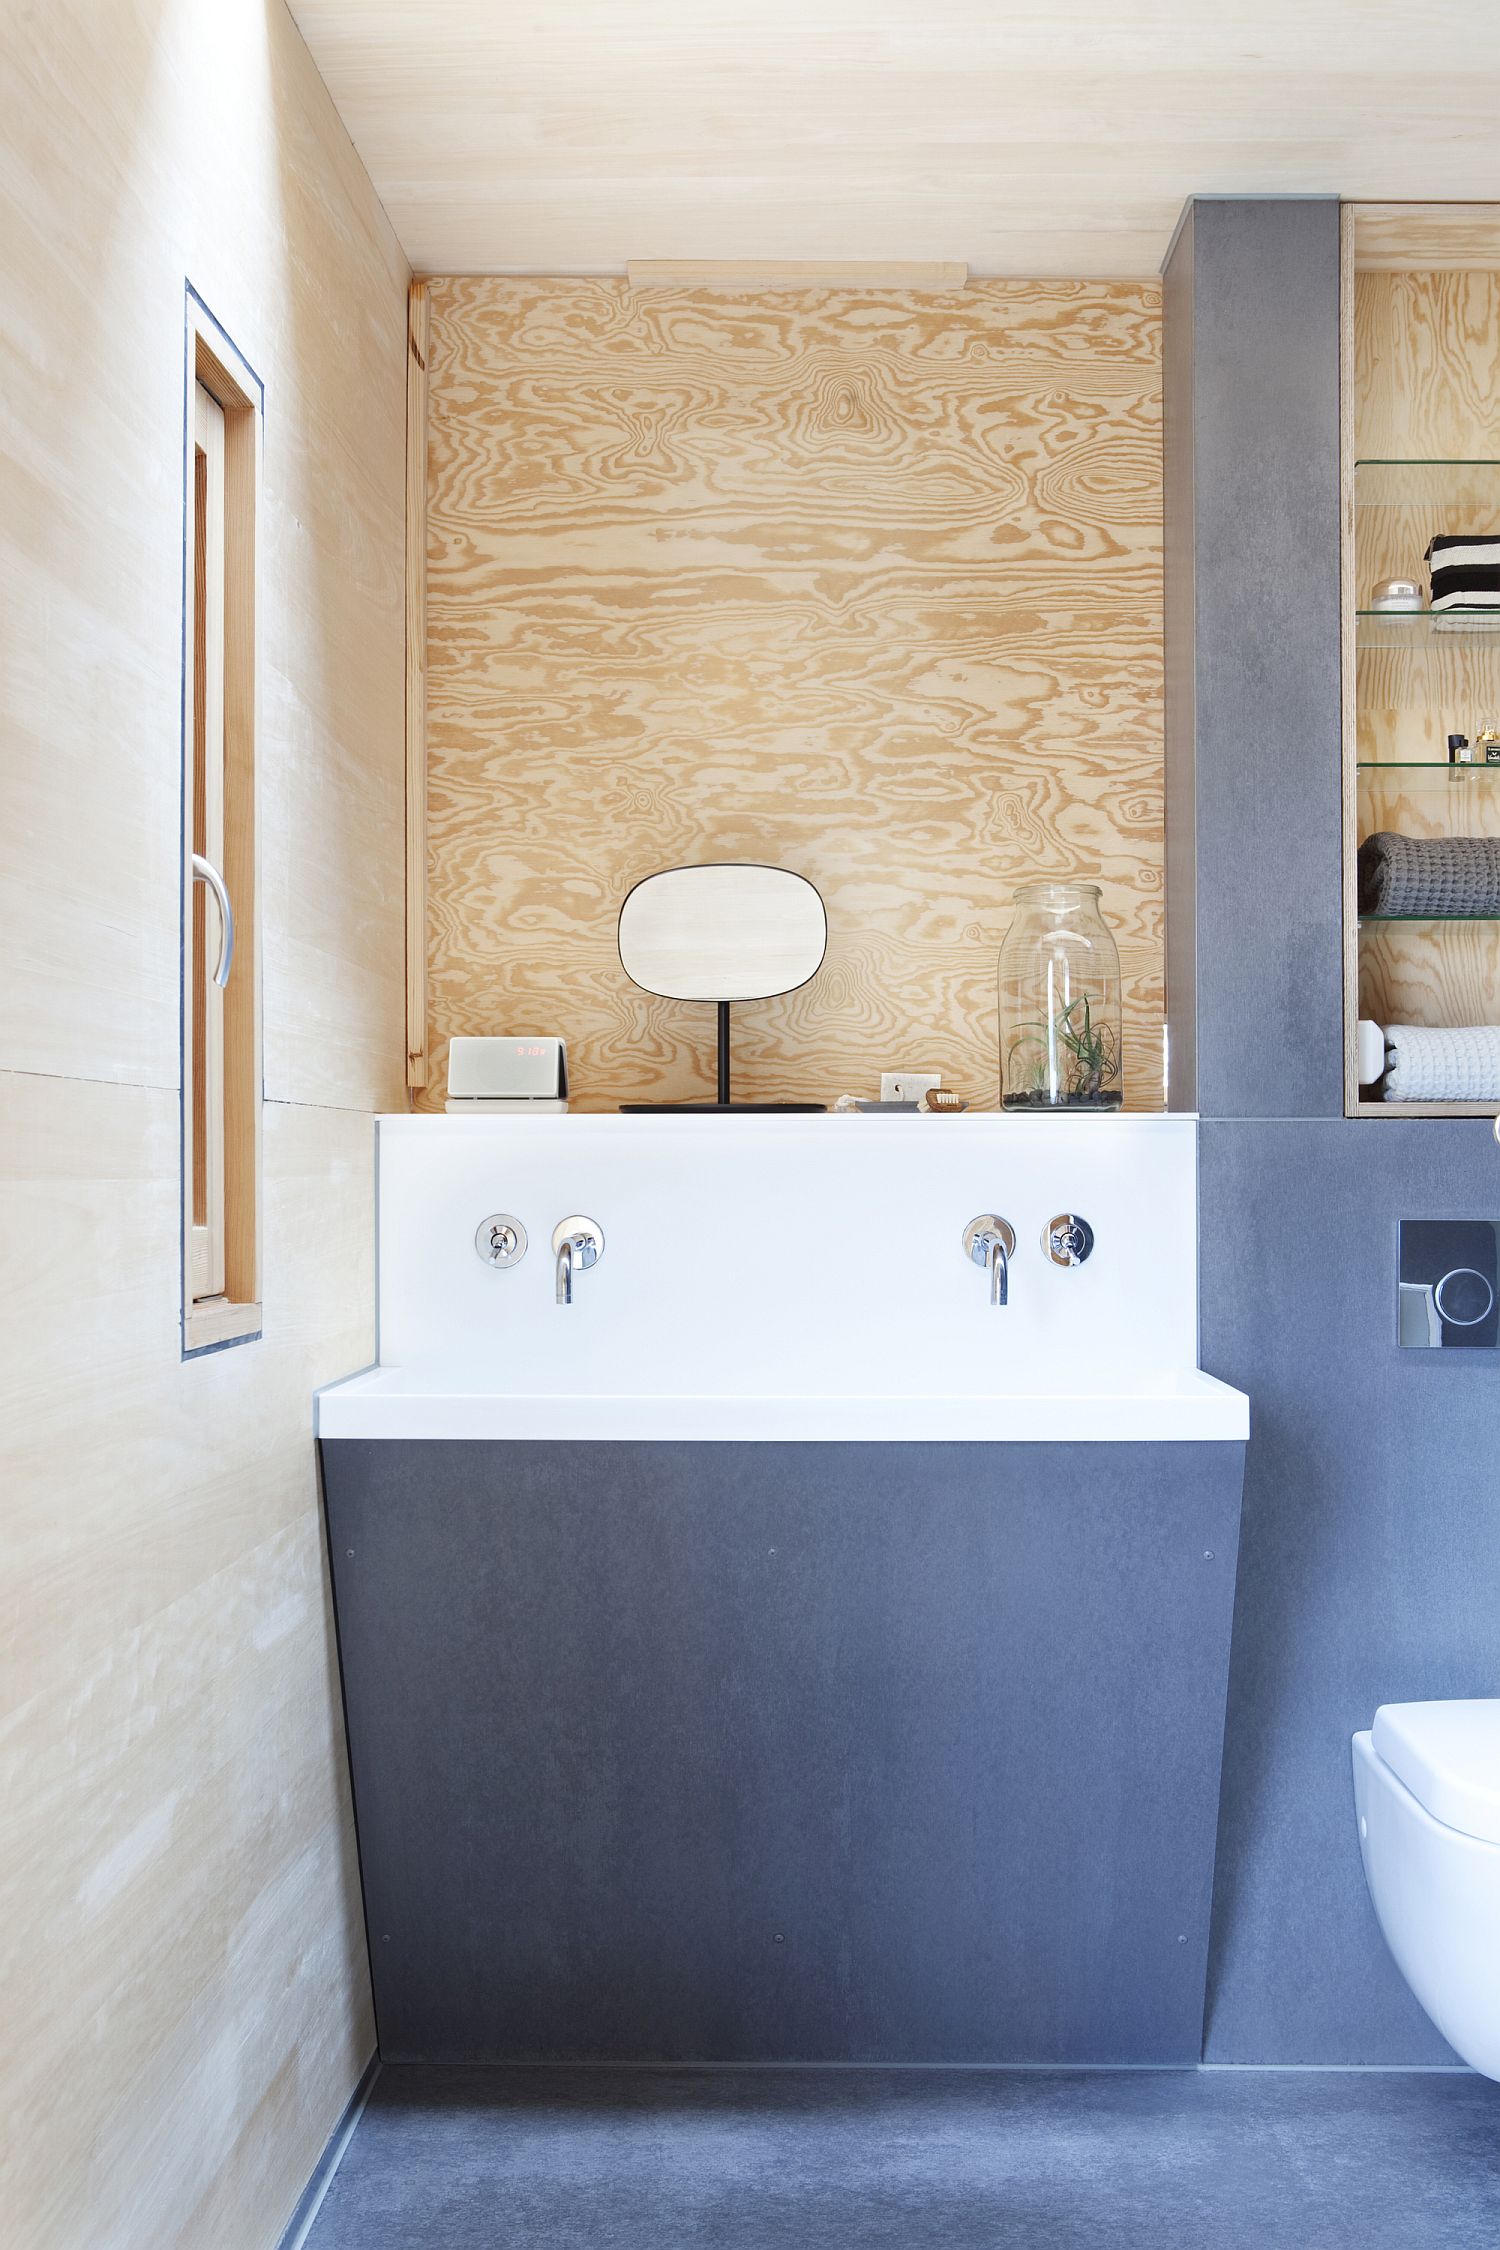 Gray, wood and white in the bathroom